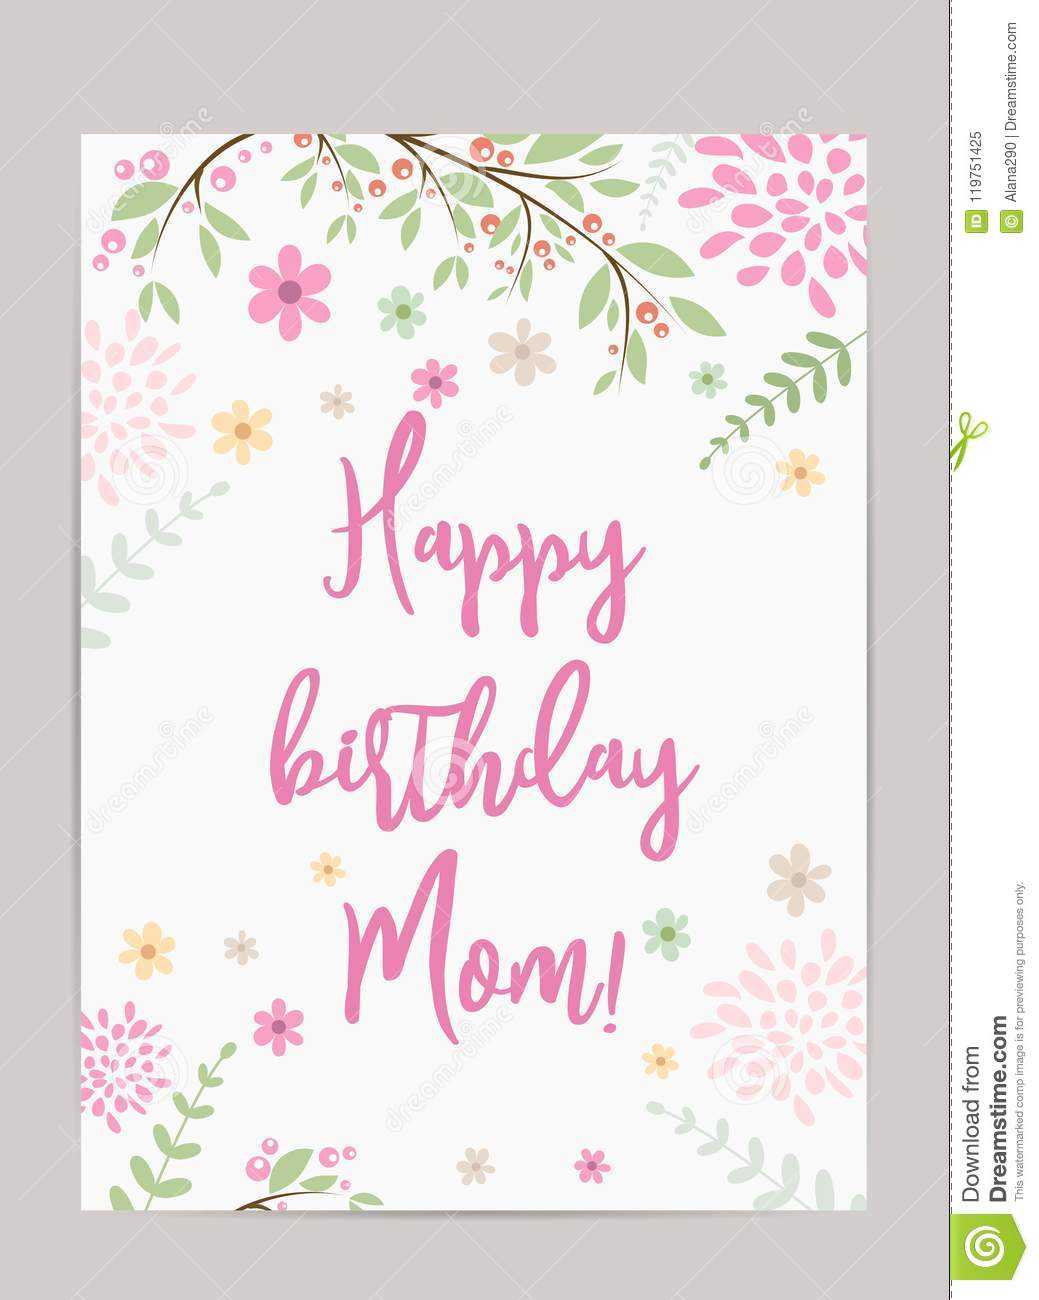 Happy Birthday Mom! Greeting Card Stock Vector For Mom Birthday Card Template